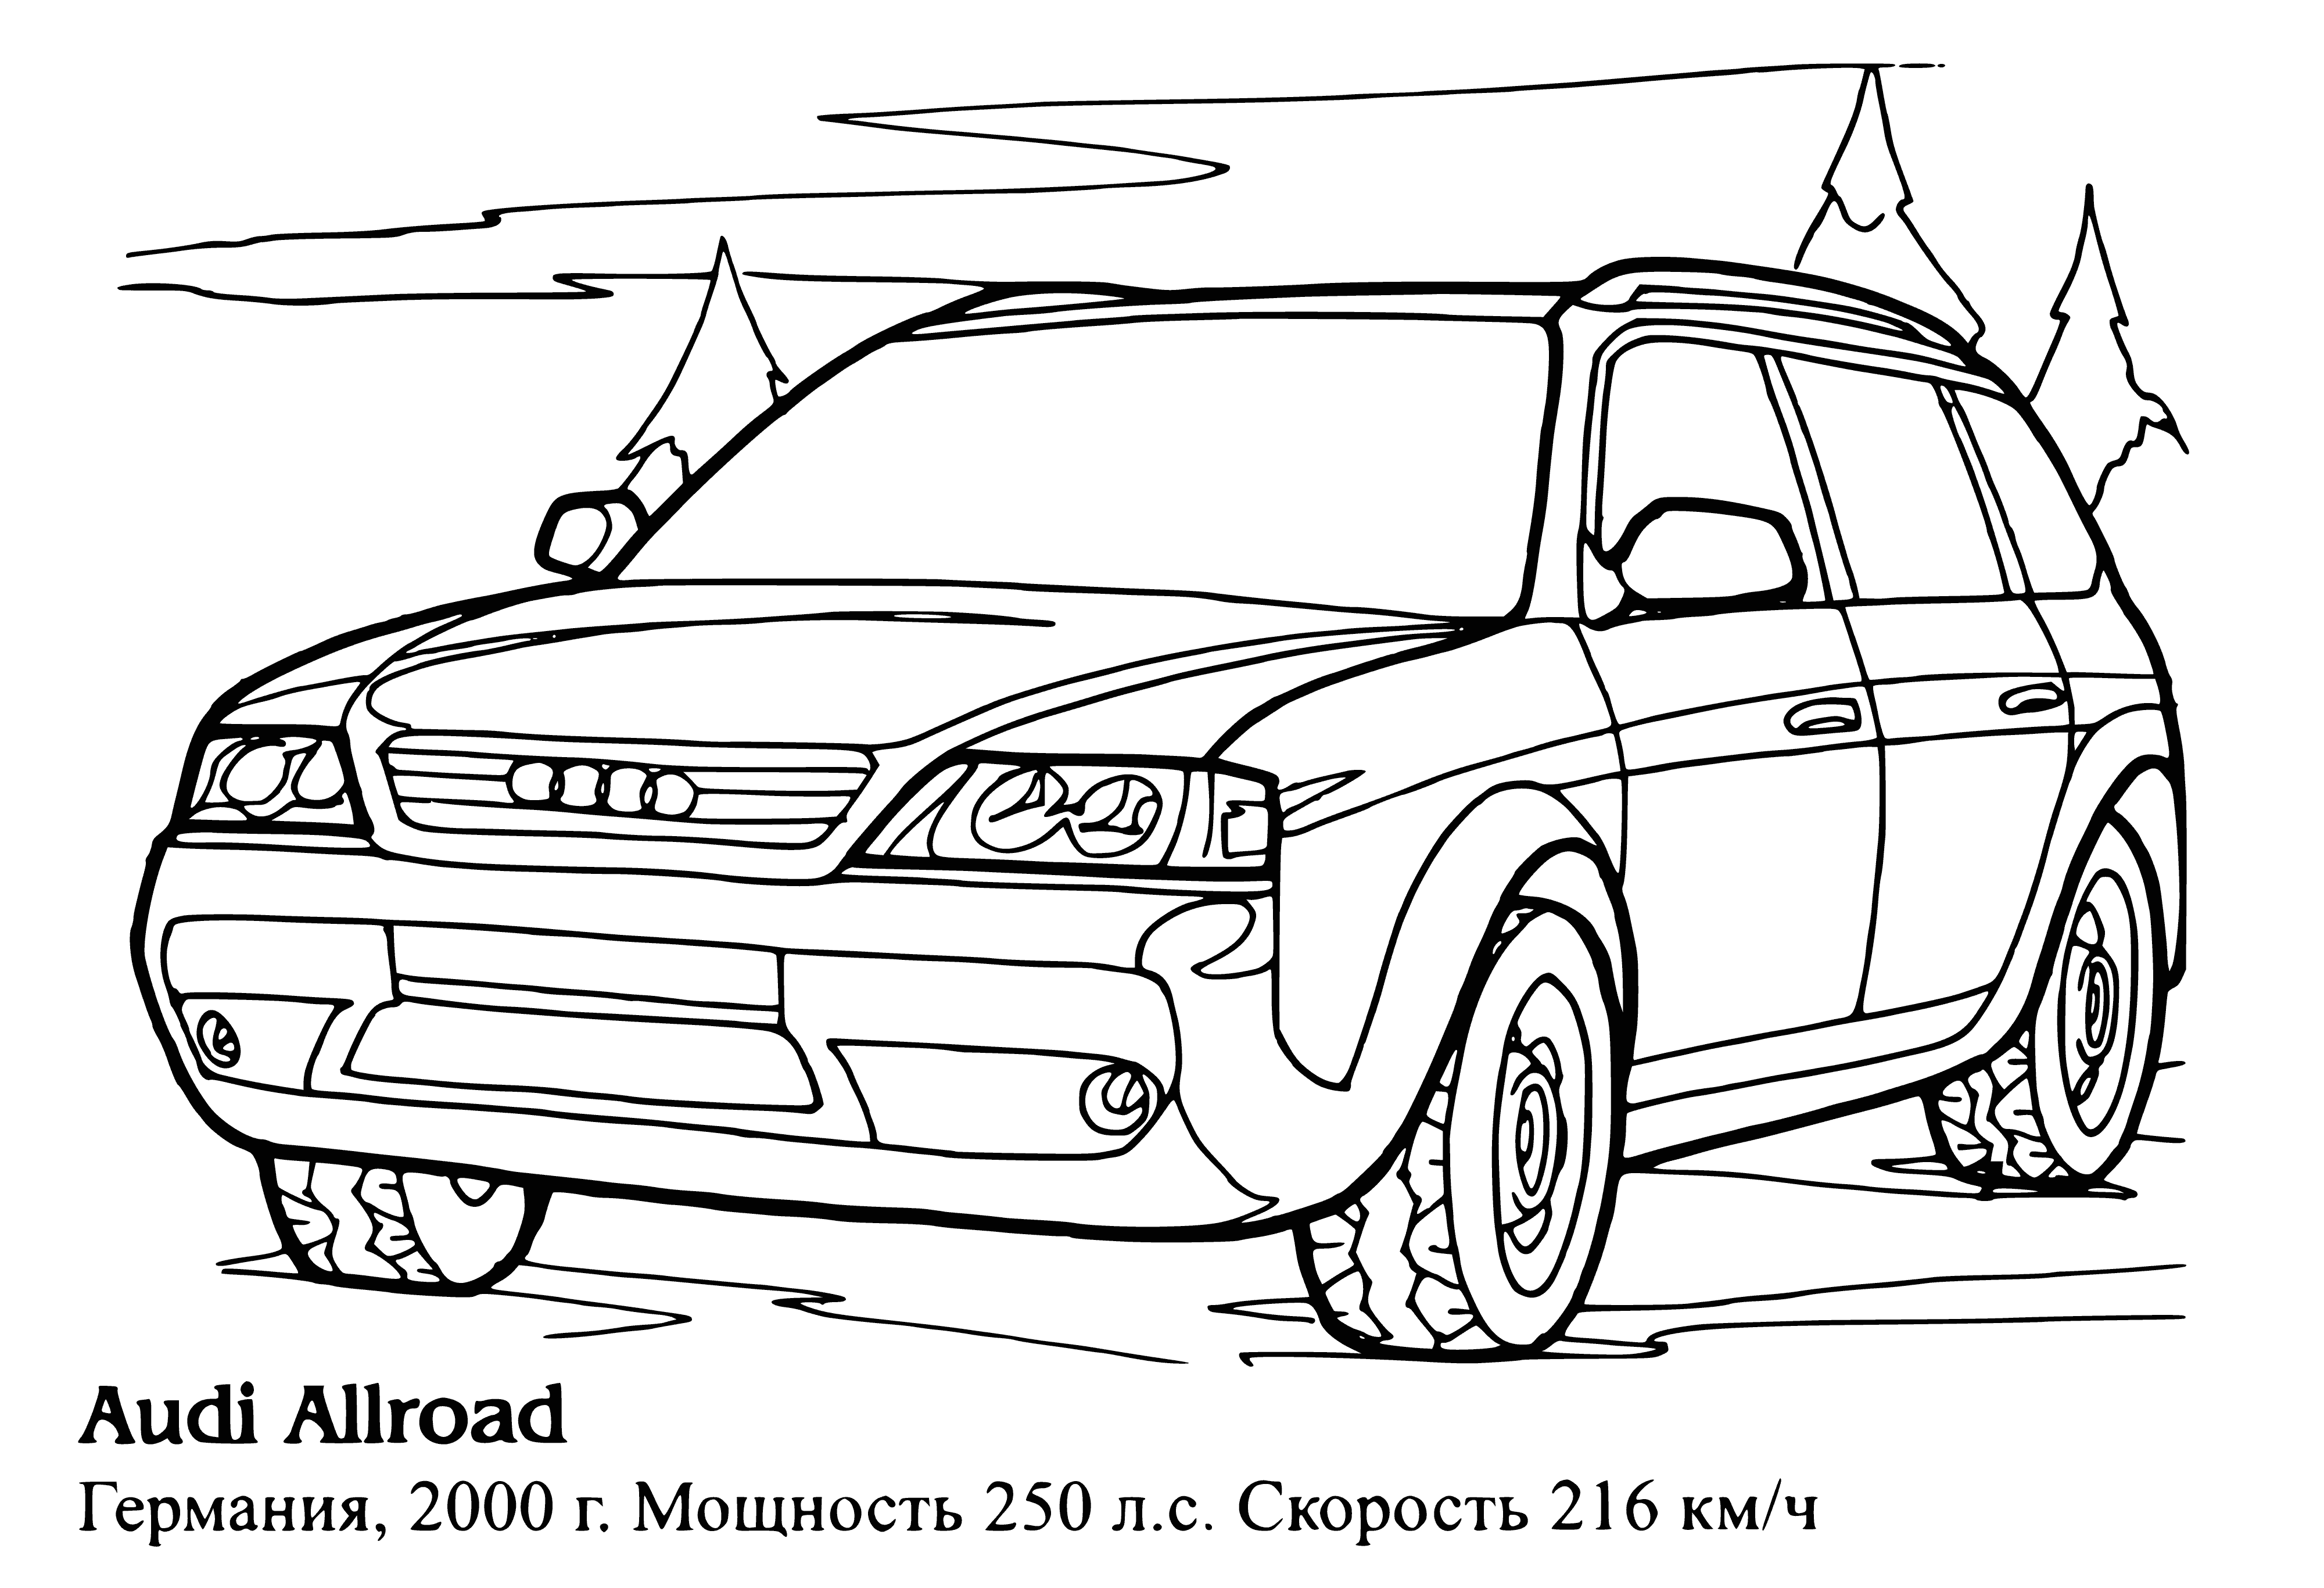 coloring page: Audi's Allroad is an all-wheel drive station wagon with raised suspension, sloping roofline, plastic cladding and a turbocharged 4-cylinder engine.